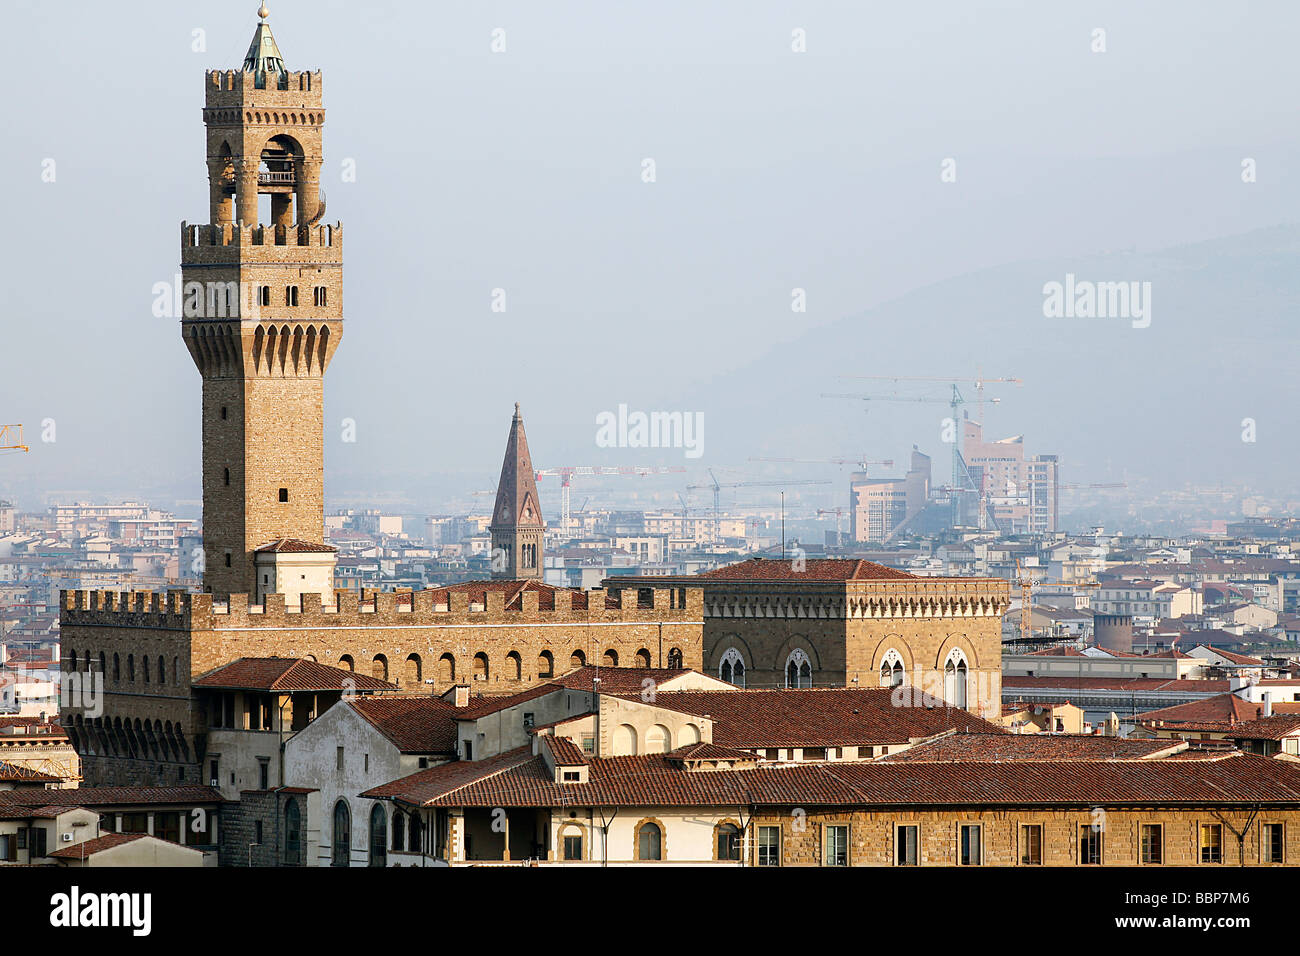 THE PALAZZO VECCHIO SEEN FROM THE PIAZZALE MICHELANGELO, FLORENCE, TUSCANY, ITALY Stock Photo